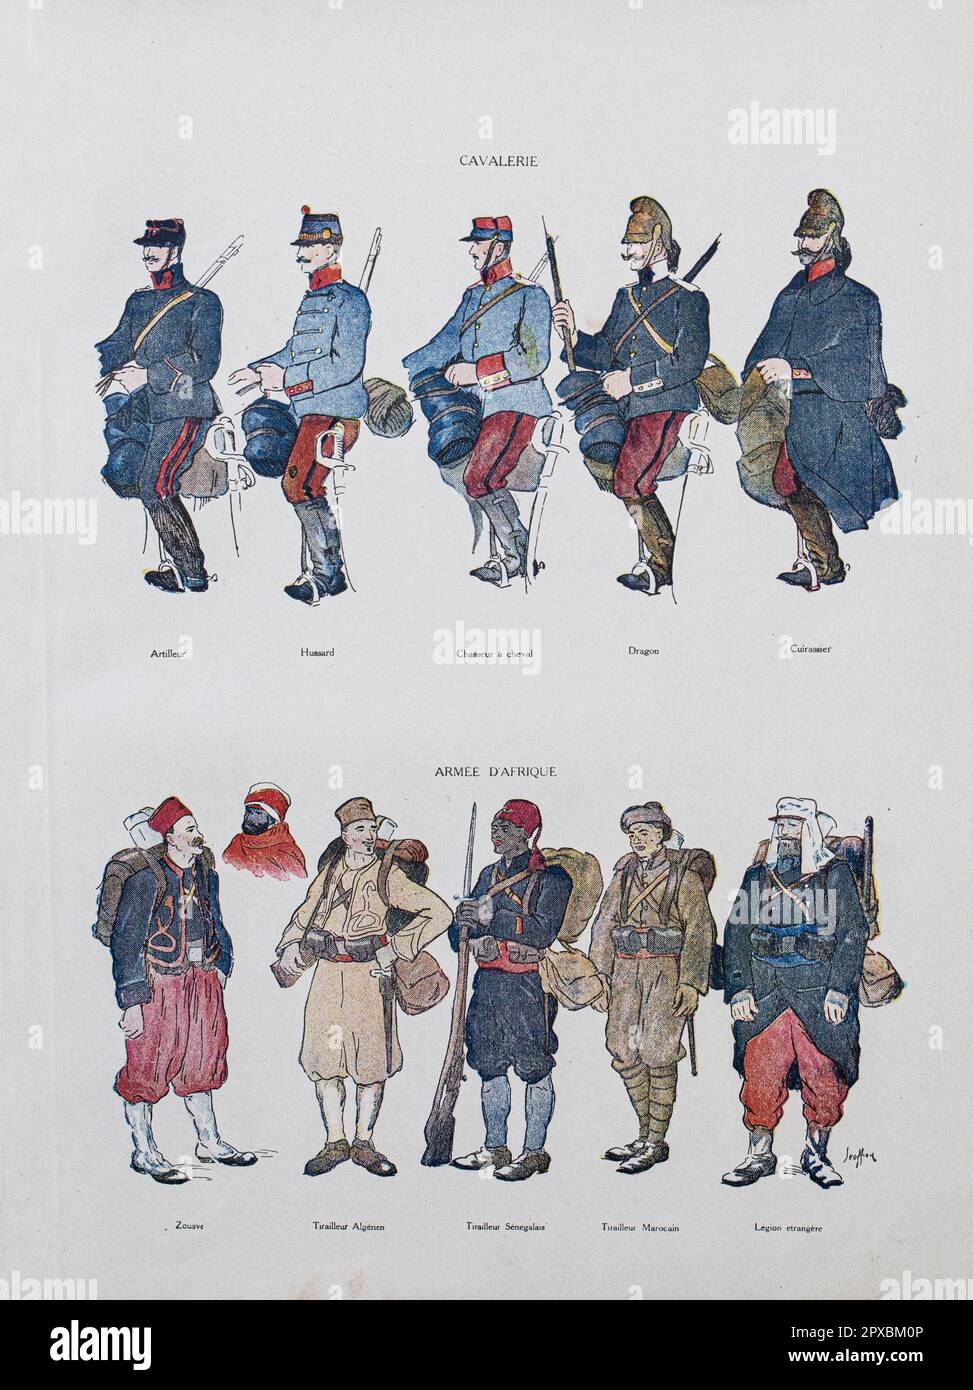 World War I. French army. Cavallry.   Top, from left to right: Artillerist (horse artillery). Hussar. Hunter on horseback (Jäger). Dragoon. Cuirassier.  French Africa troops.  Bottom, from left to right: Zouave. Algerian Rifleman. Senegalese Rifleman. Moroccan Rifleman. Soldier of Foreign legion. Stock Photo